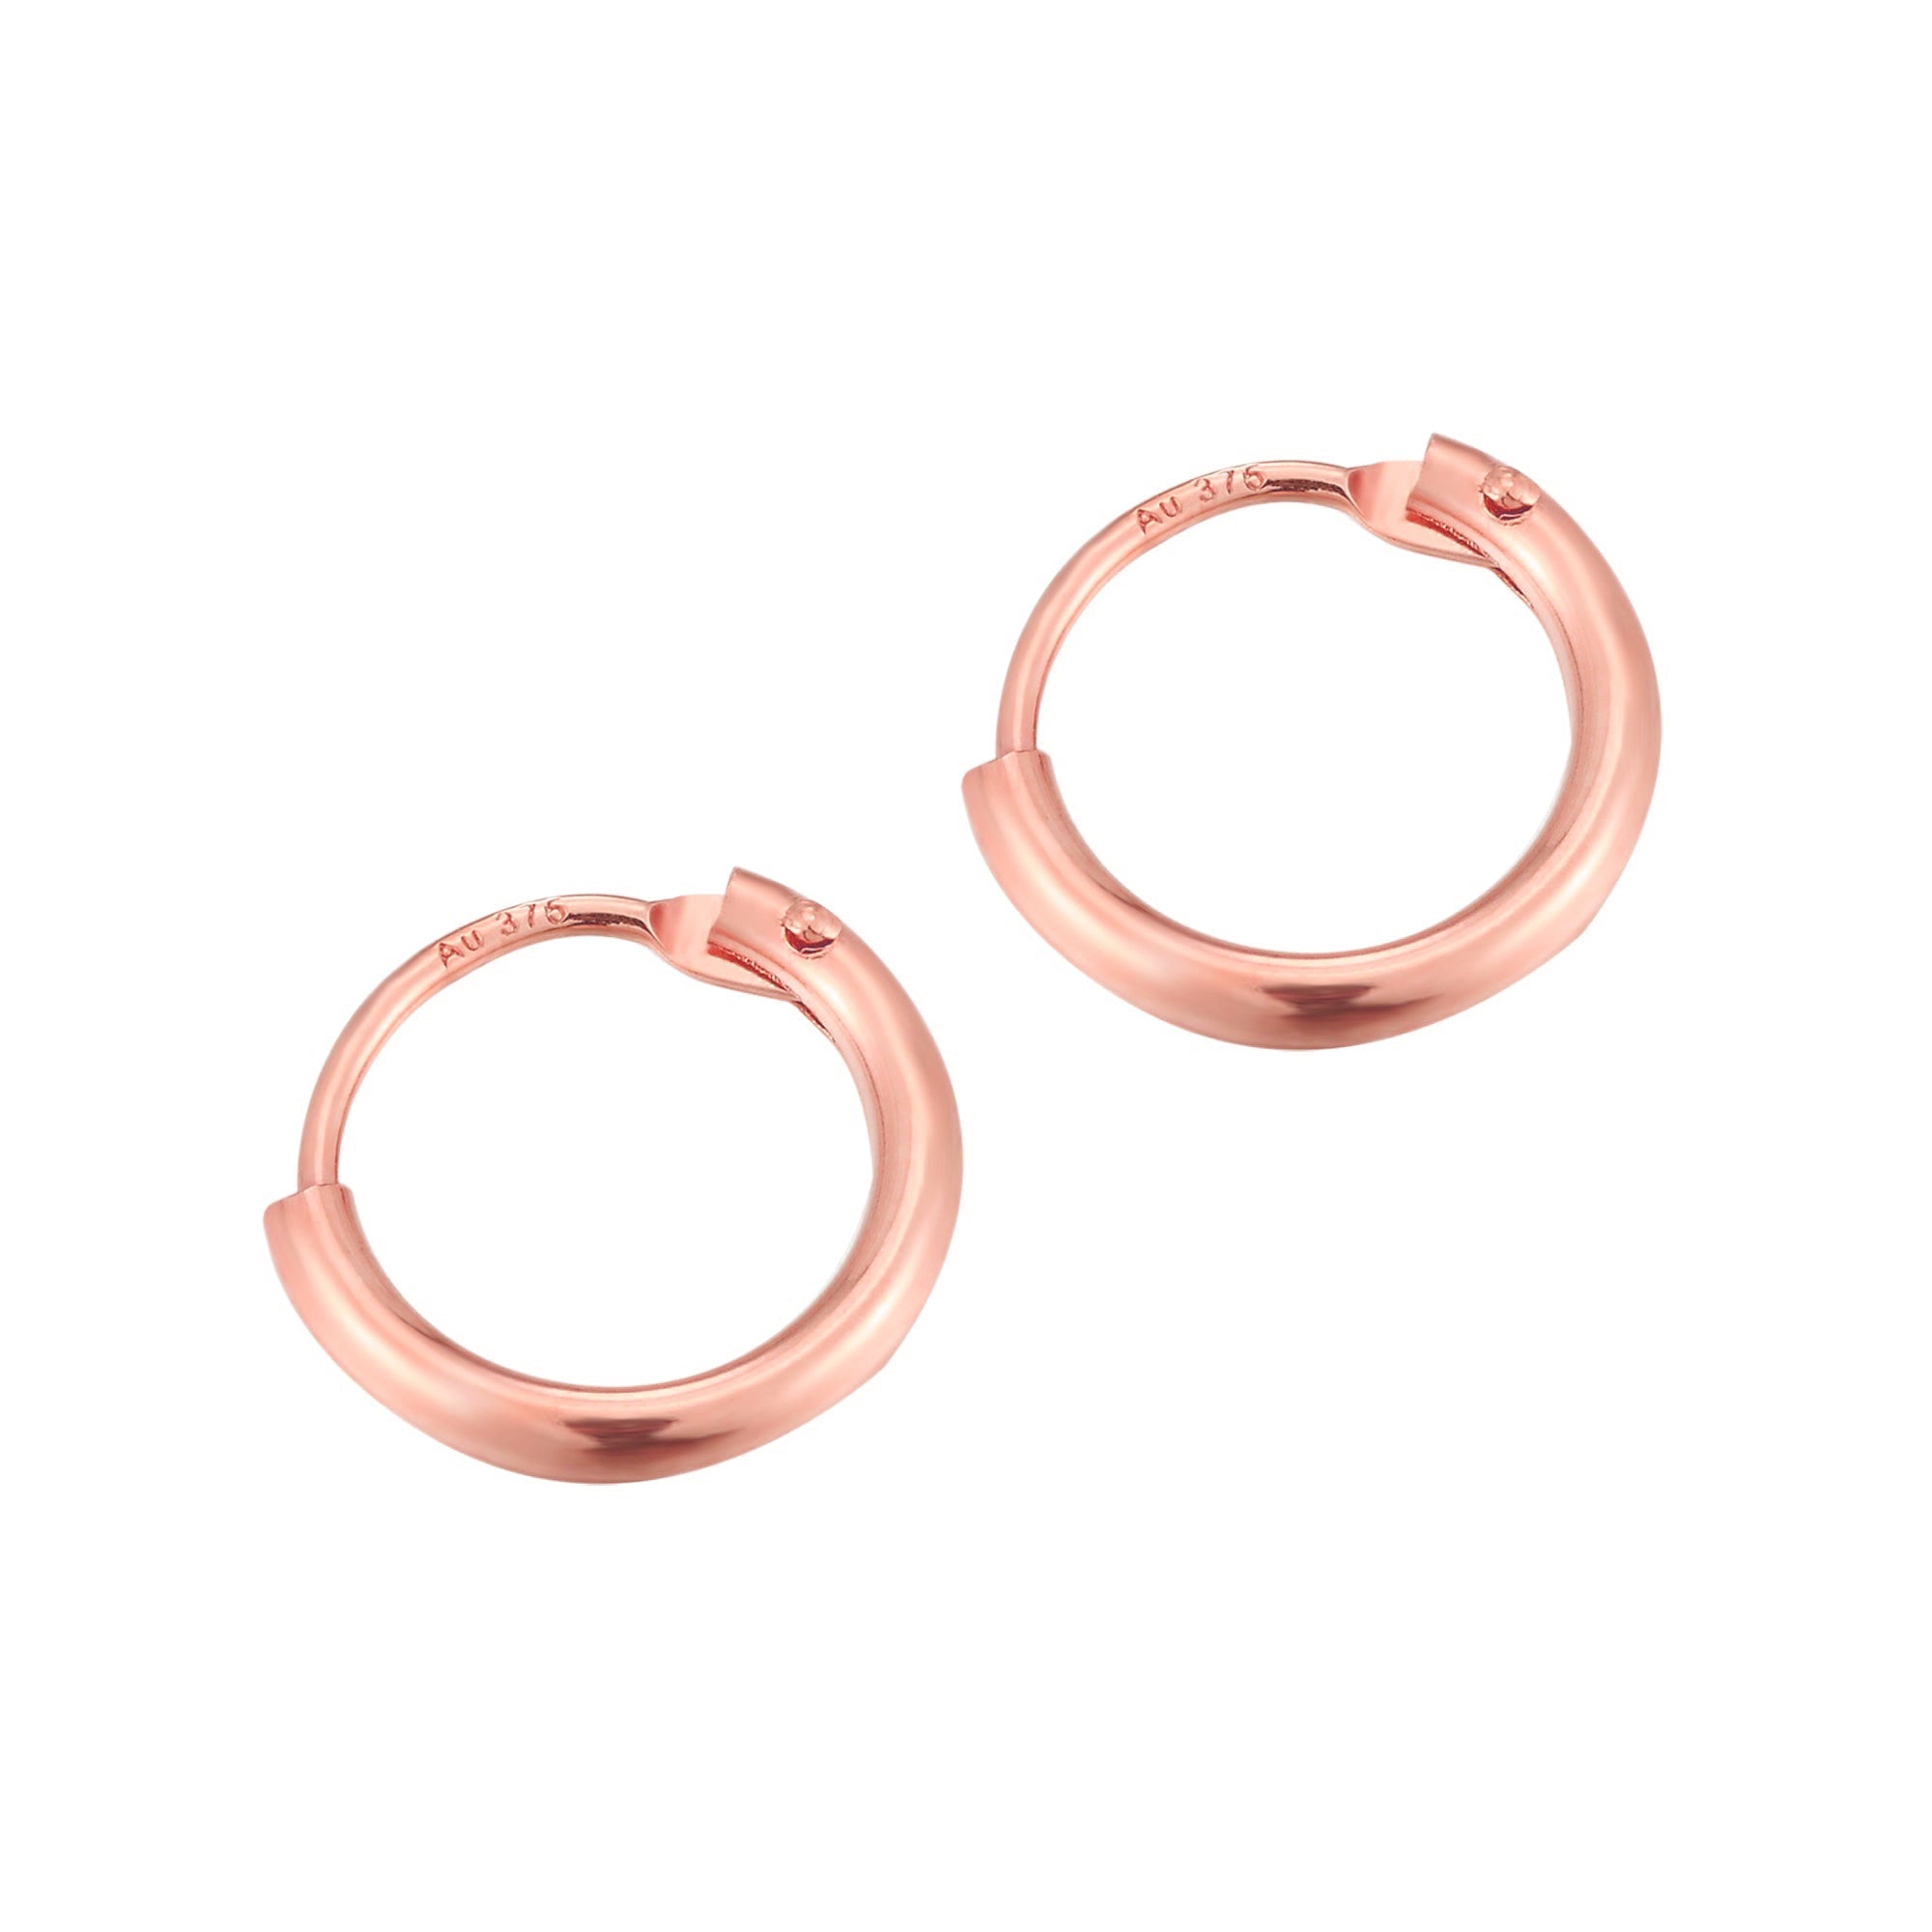 Solid gold rose gold hoops - seolgold